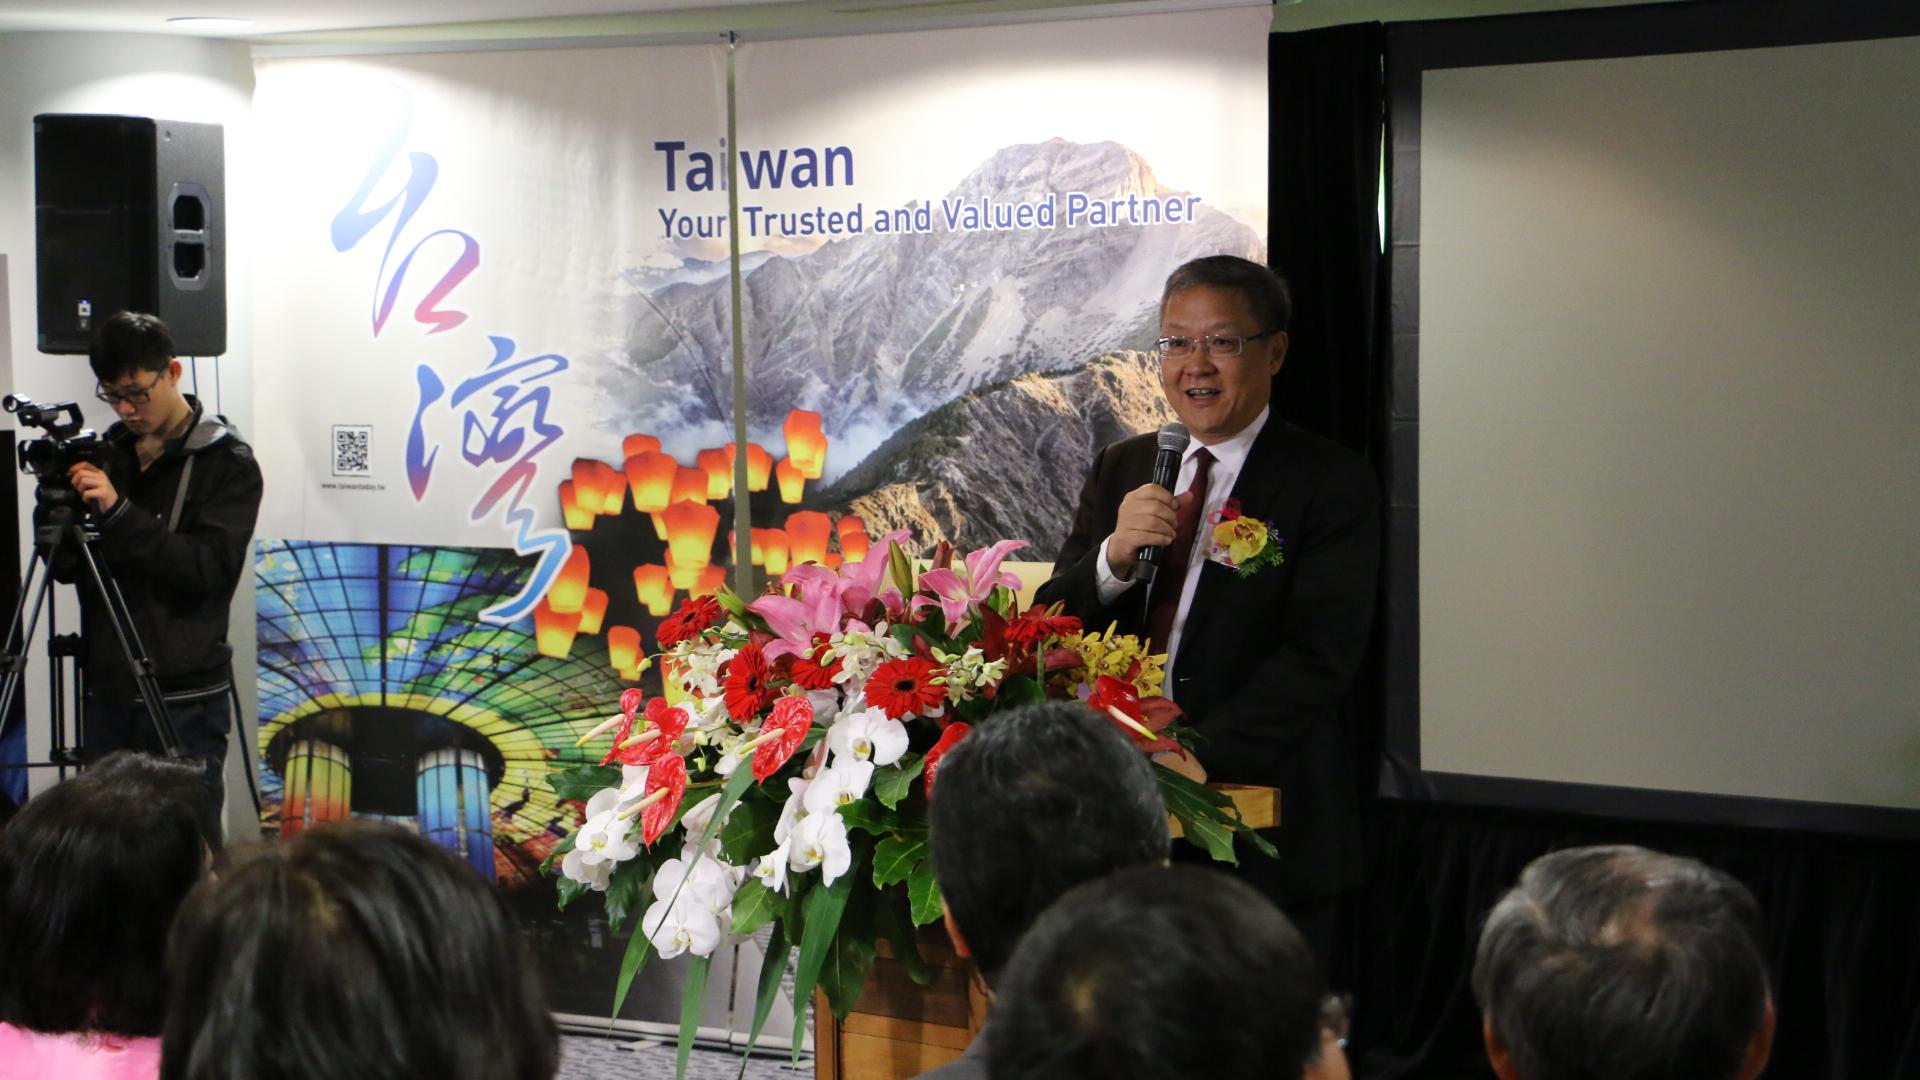 Representative Dale Jieh speaks at the opening ceremony 